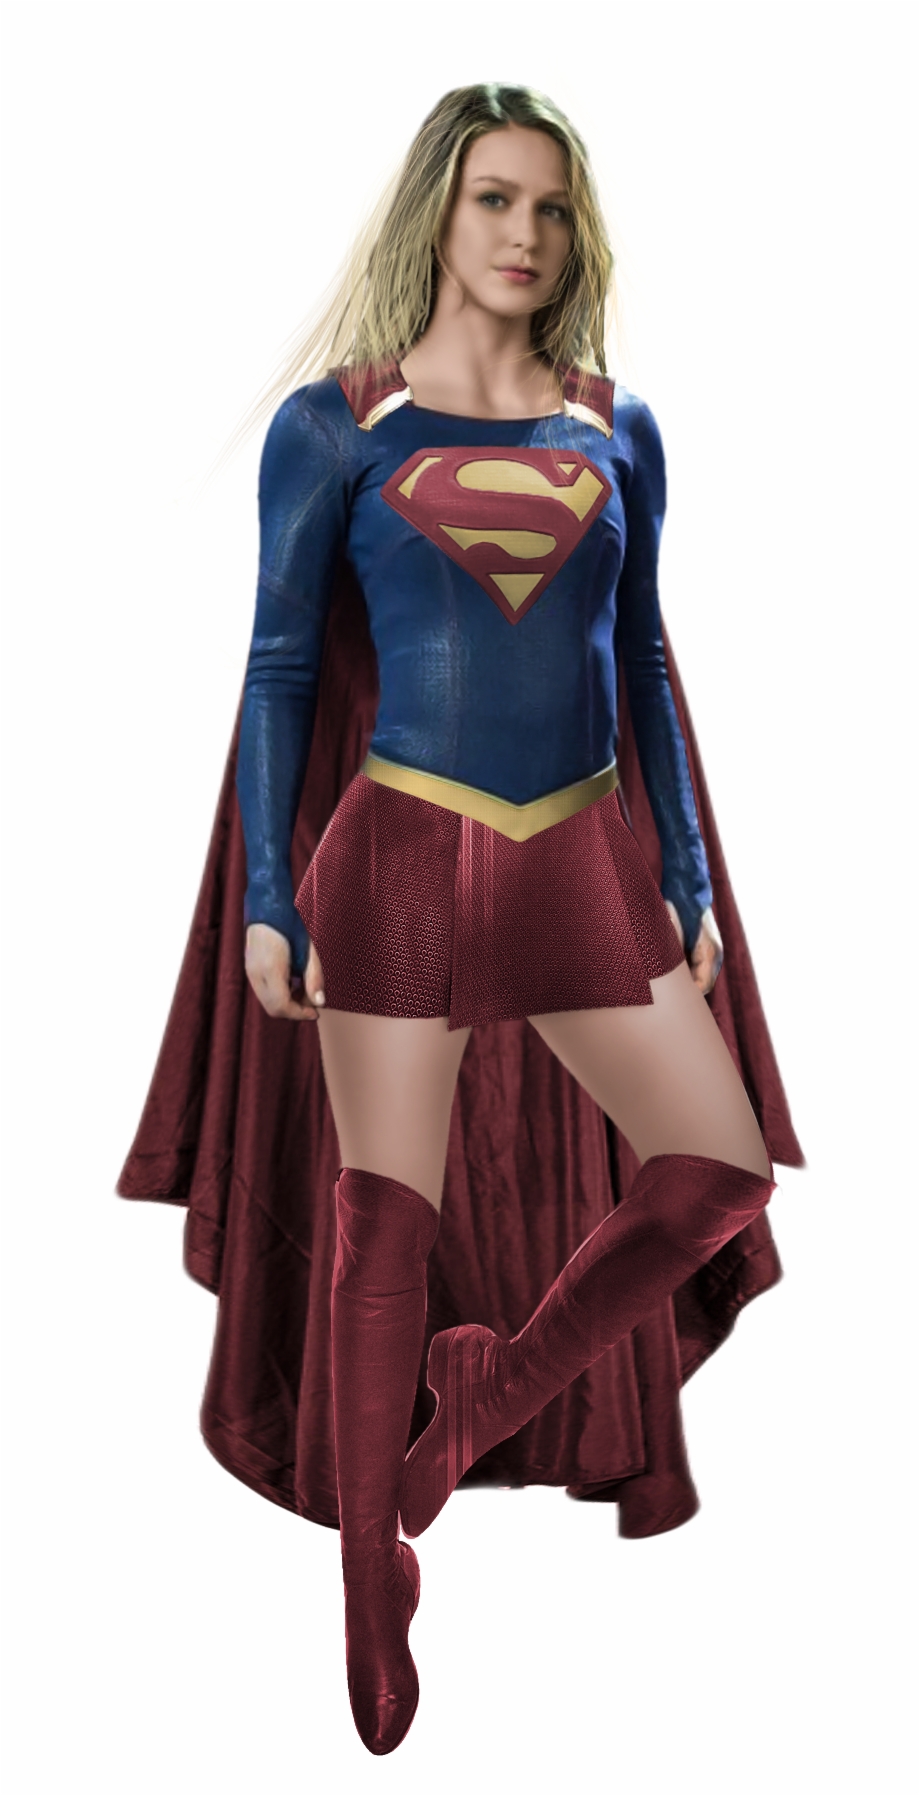 Free Super Girl Png, Download Free Super Girl Png png images, Free ...